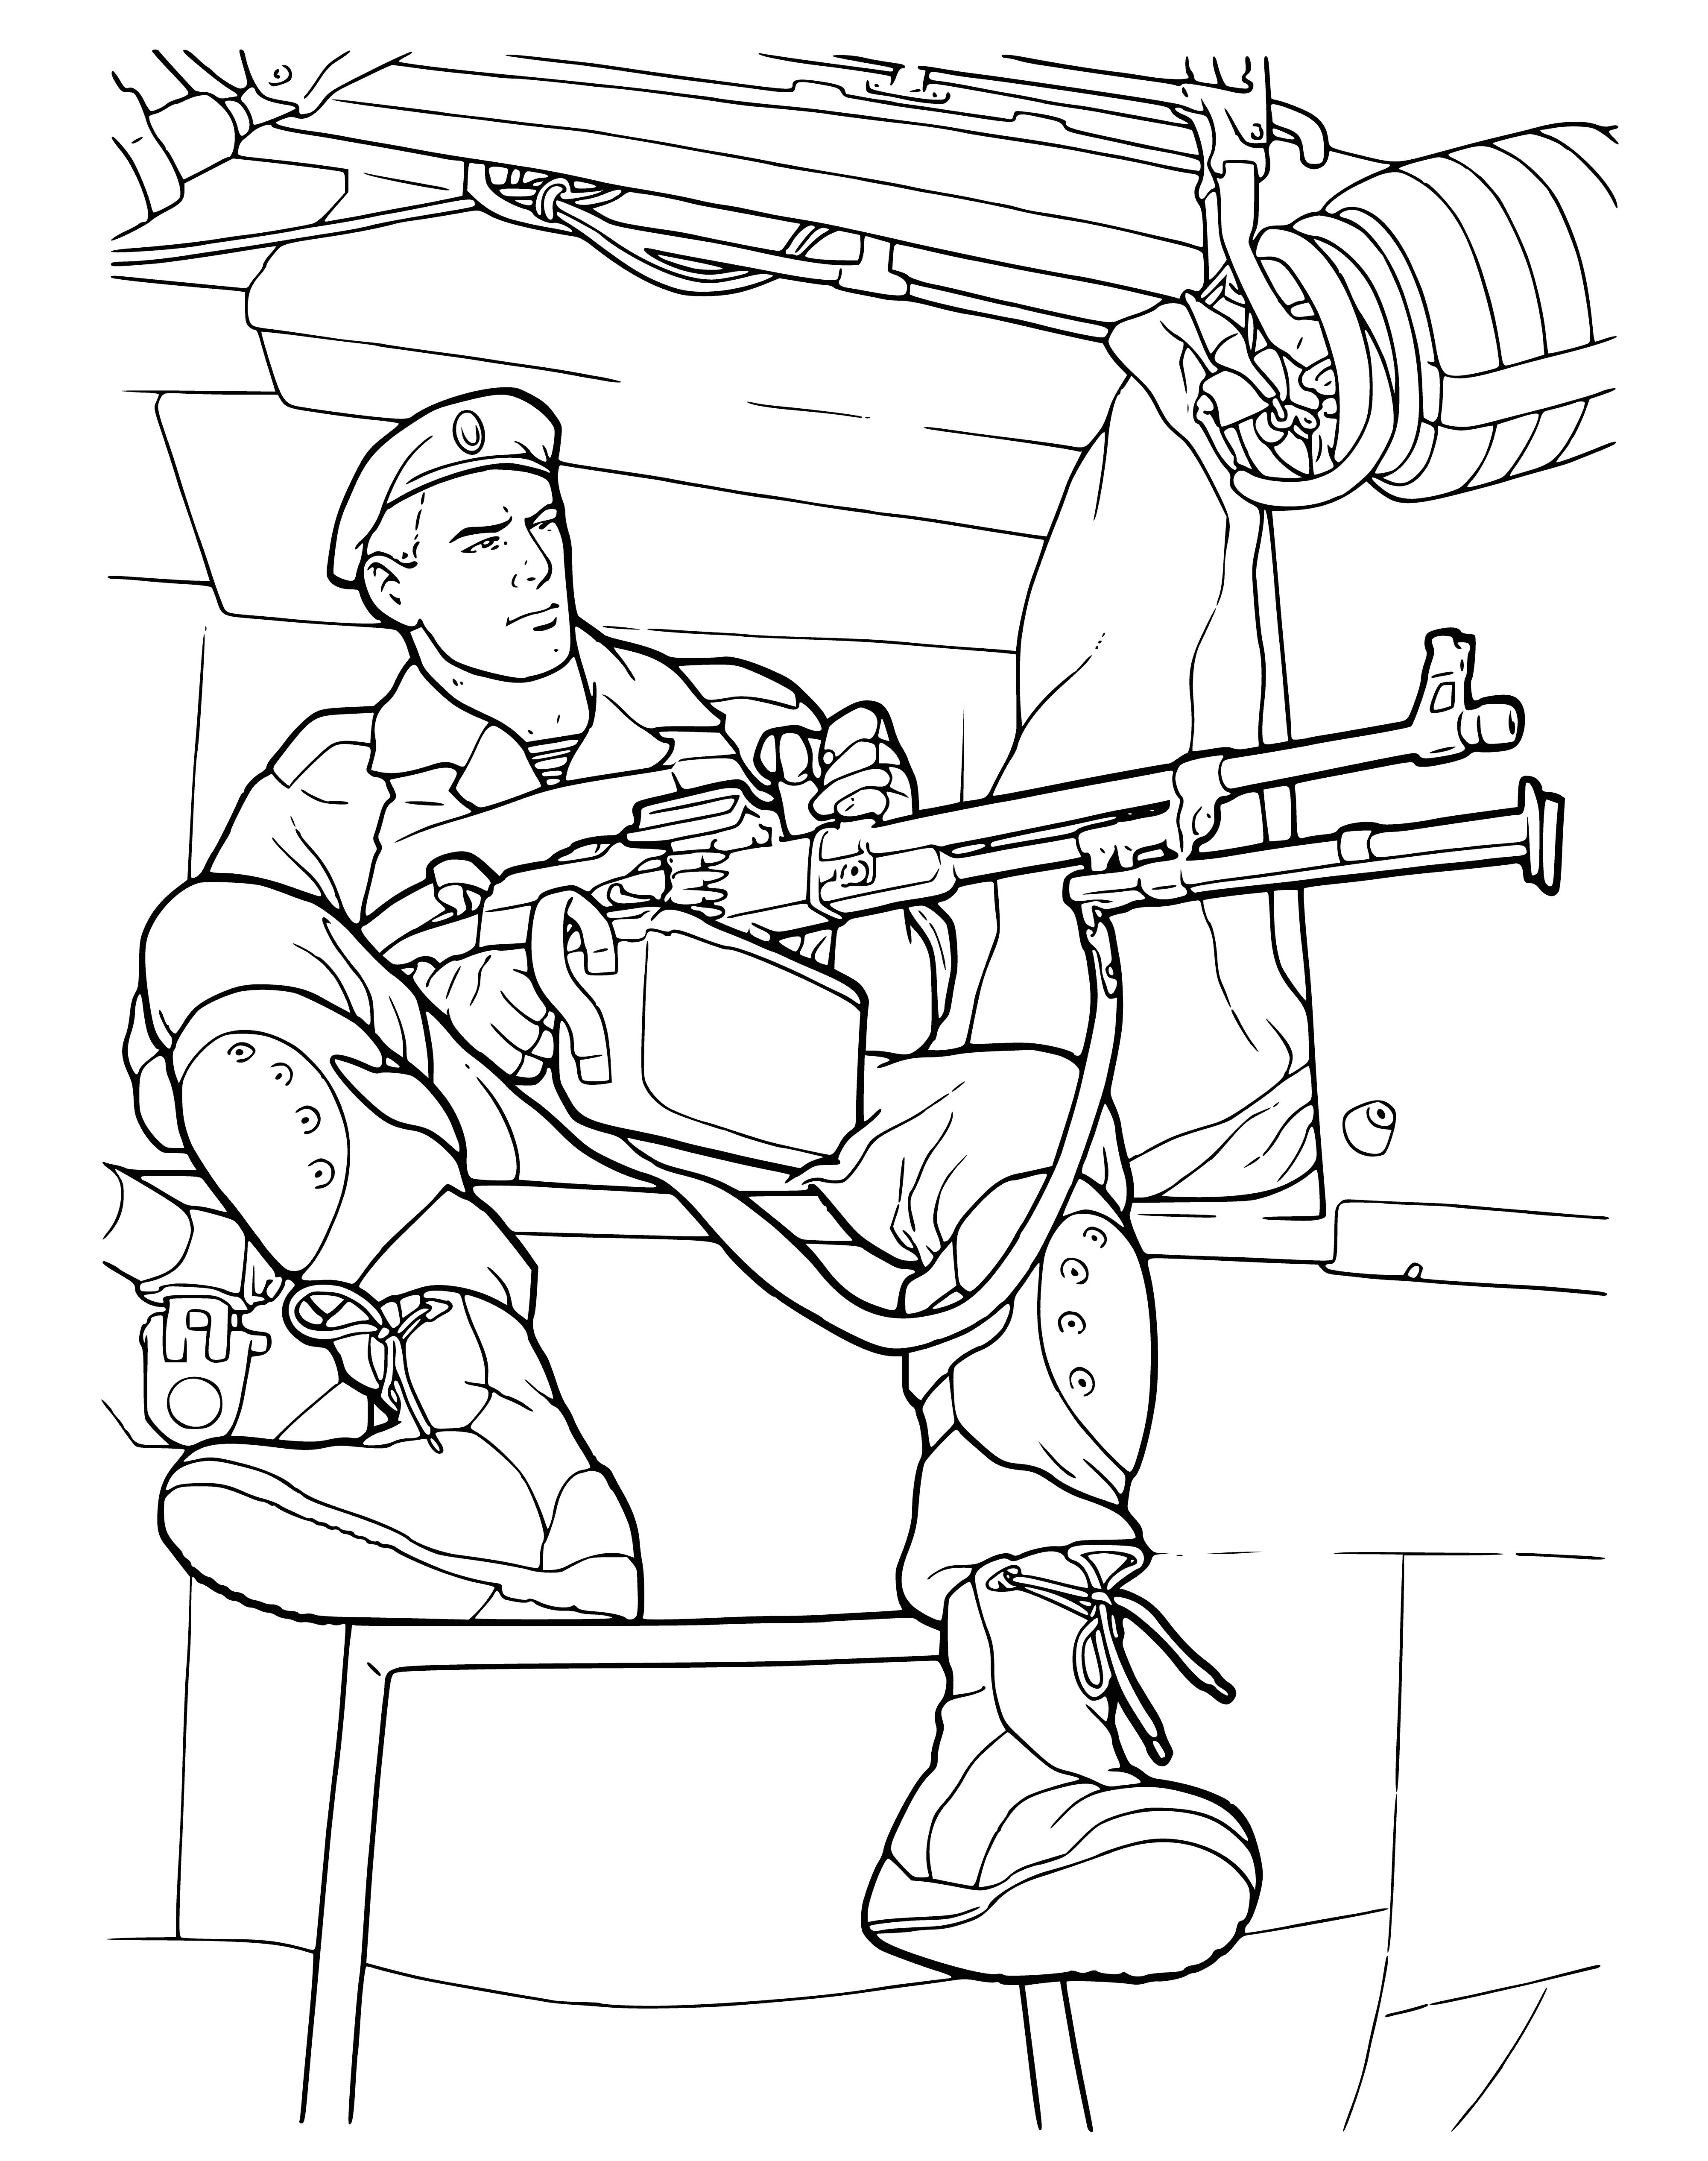 coloring page: Marines in desert landscape ready for combat, guns in hand. #MarineLife #DesertScenes